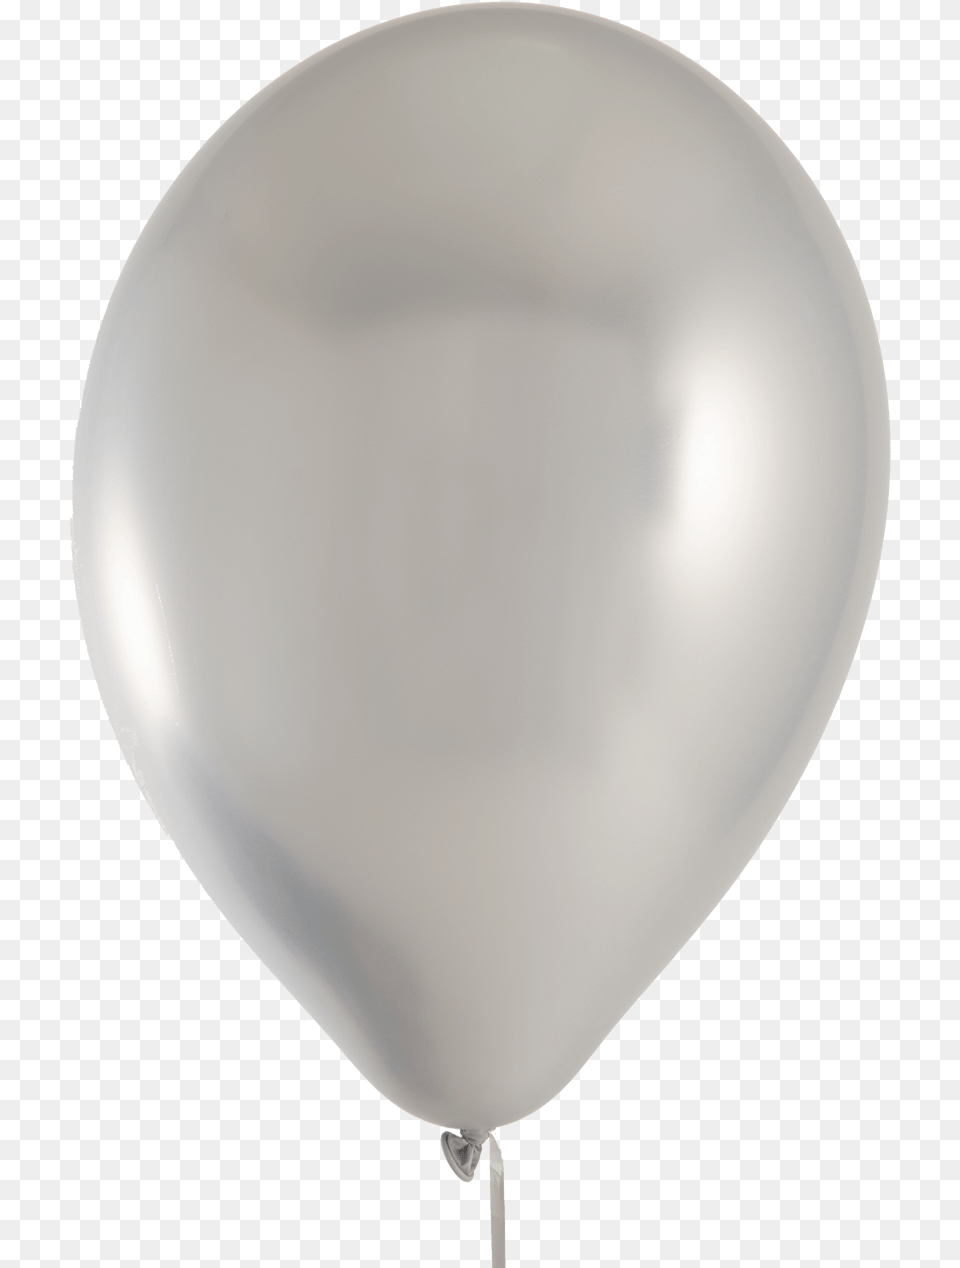 Chrome Silver Balloon Qualatex Chrome Latex Balloons, Accessories, Plate Free Transparent Png